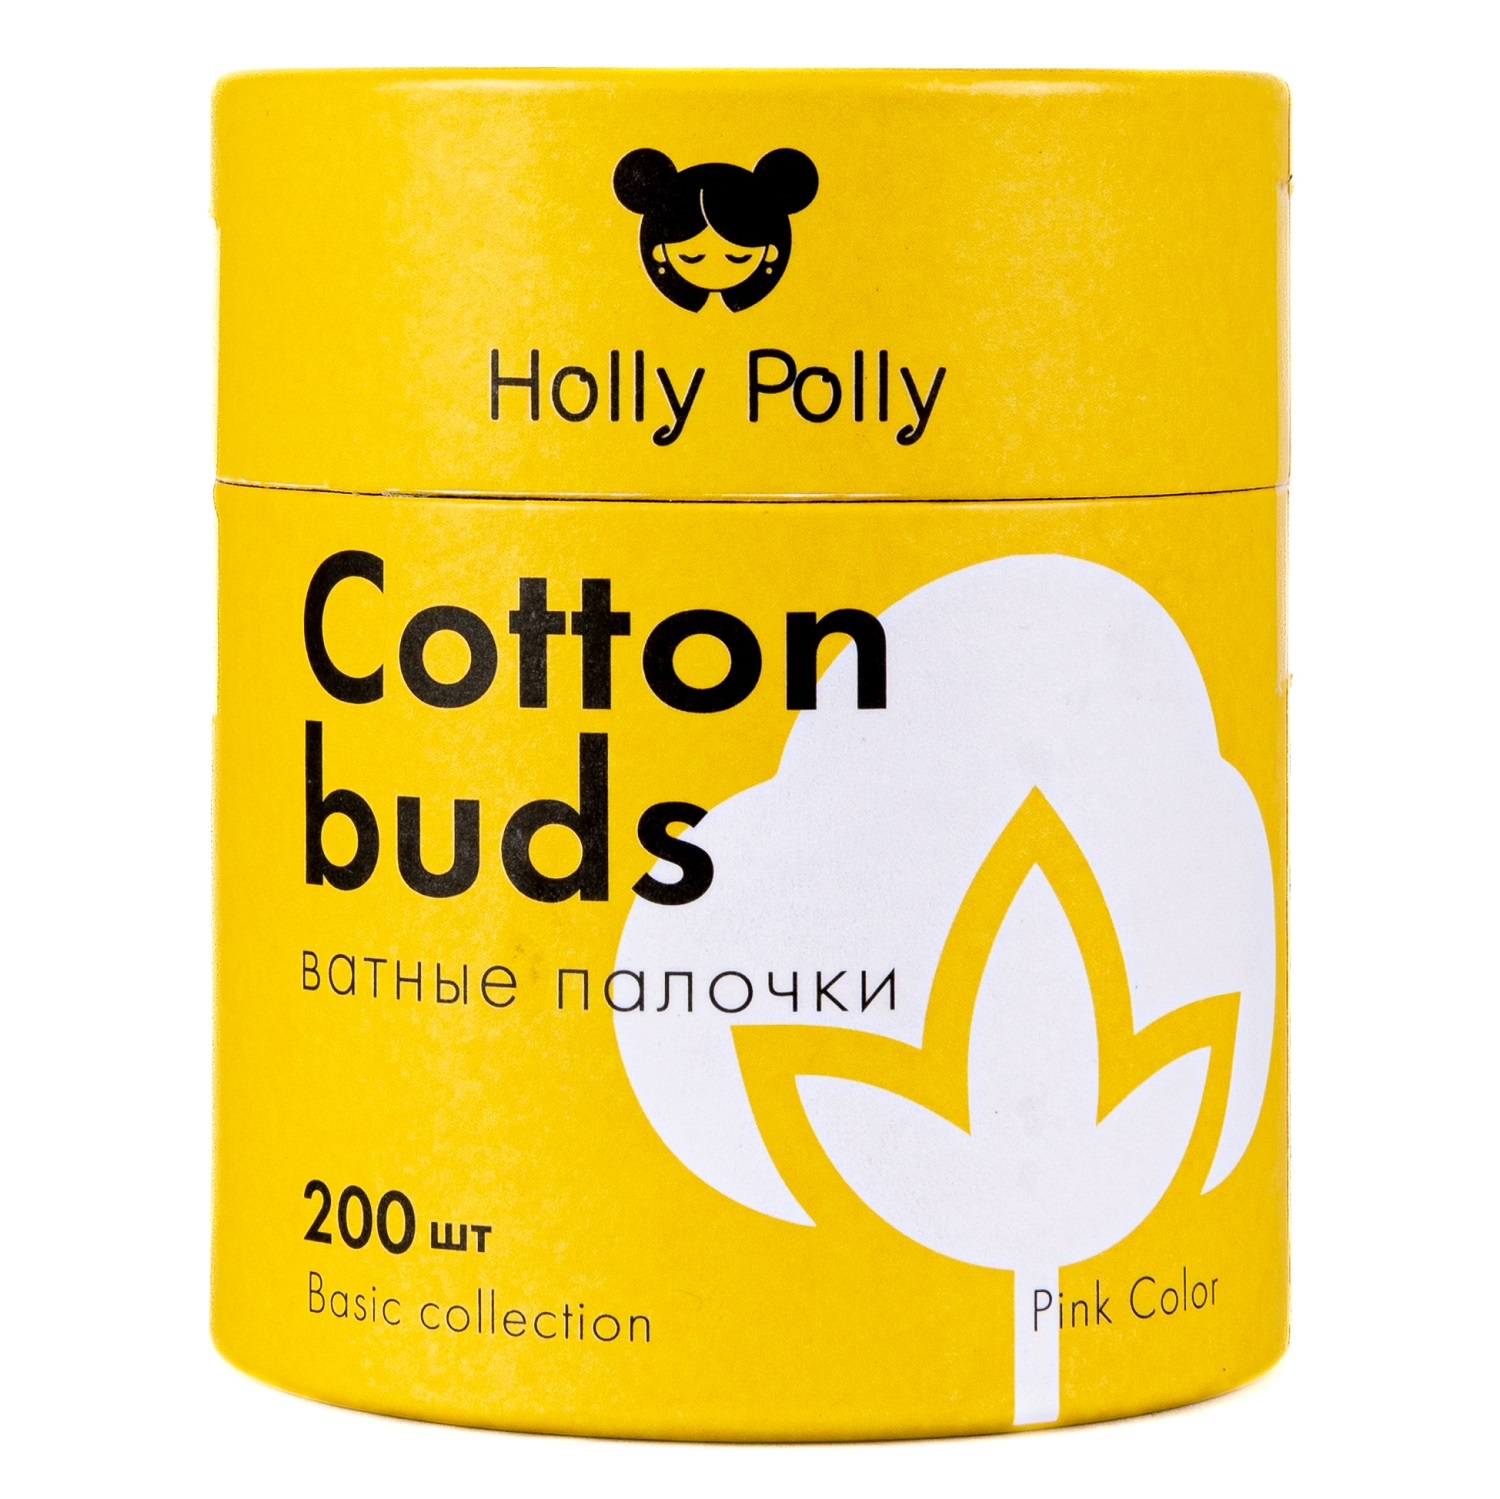 ватные диски holly polly cotton pads cosmetic pink 80 шт Holly Polly Косметические ватные палочки бамбуковые розовые, 200 шт (Holly Polly, Cotton Pads & Buds)